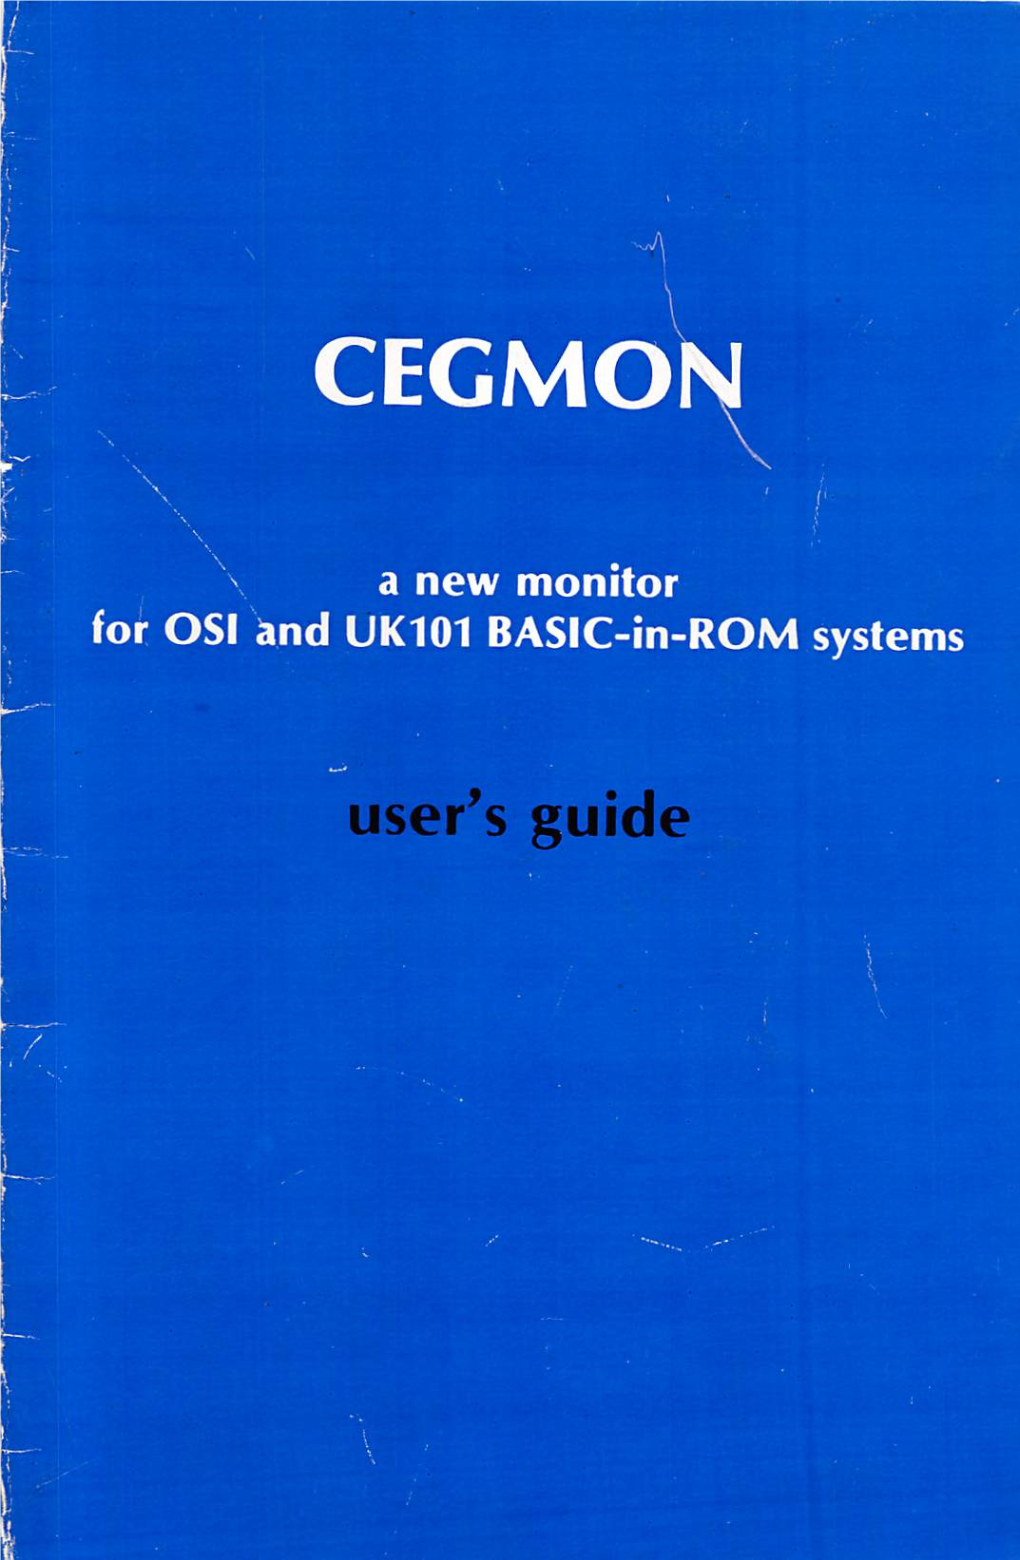 User's Guide Warranty Terms Thereisno Warranty, Either Expressed Or Implied, for CEGMON in Anyversion